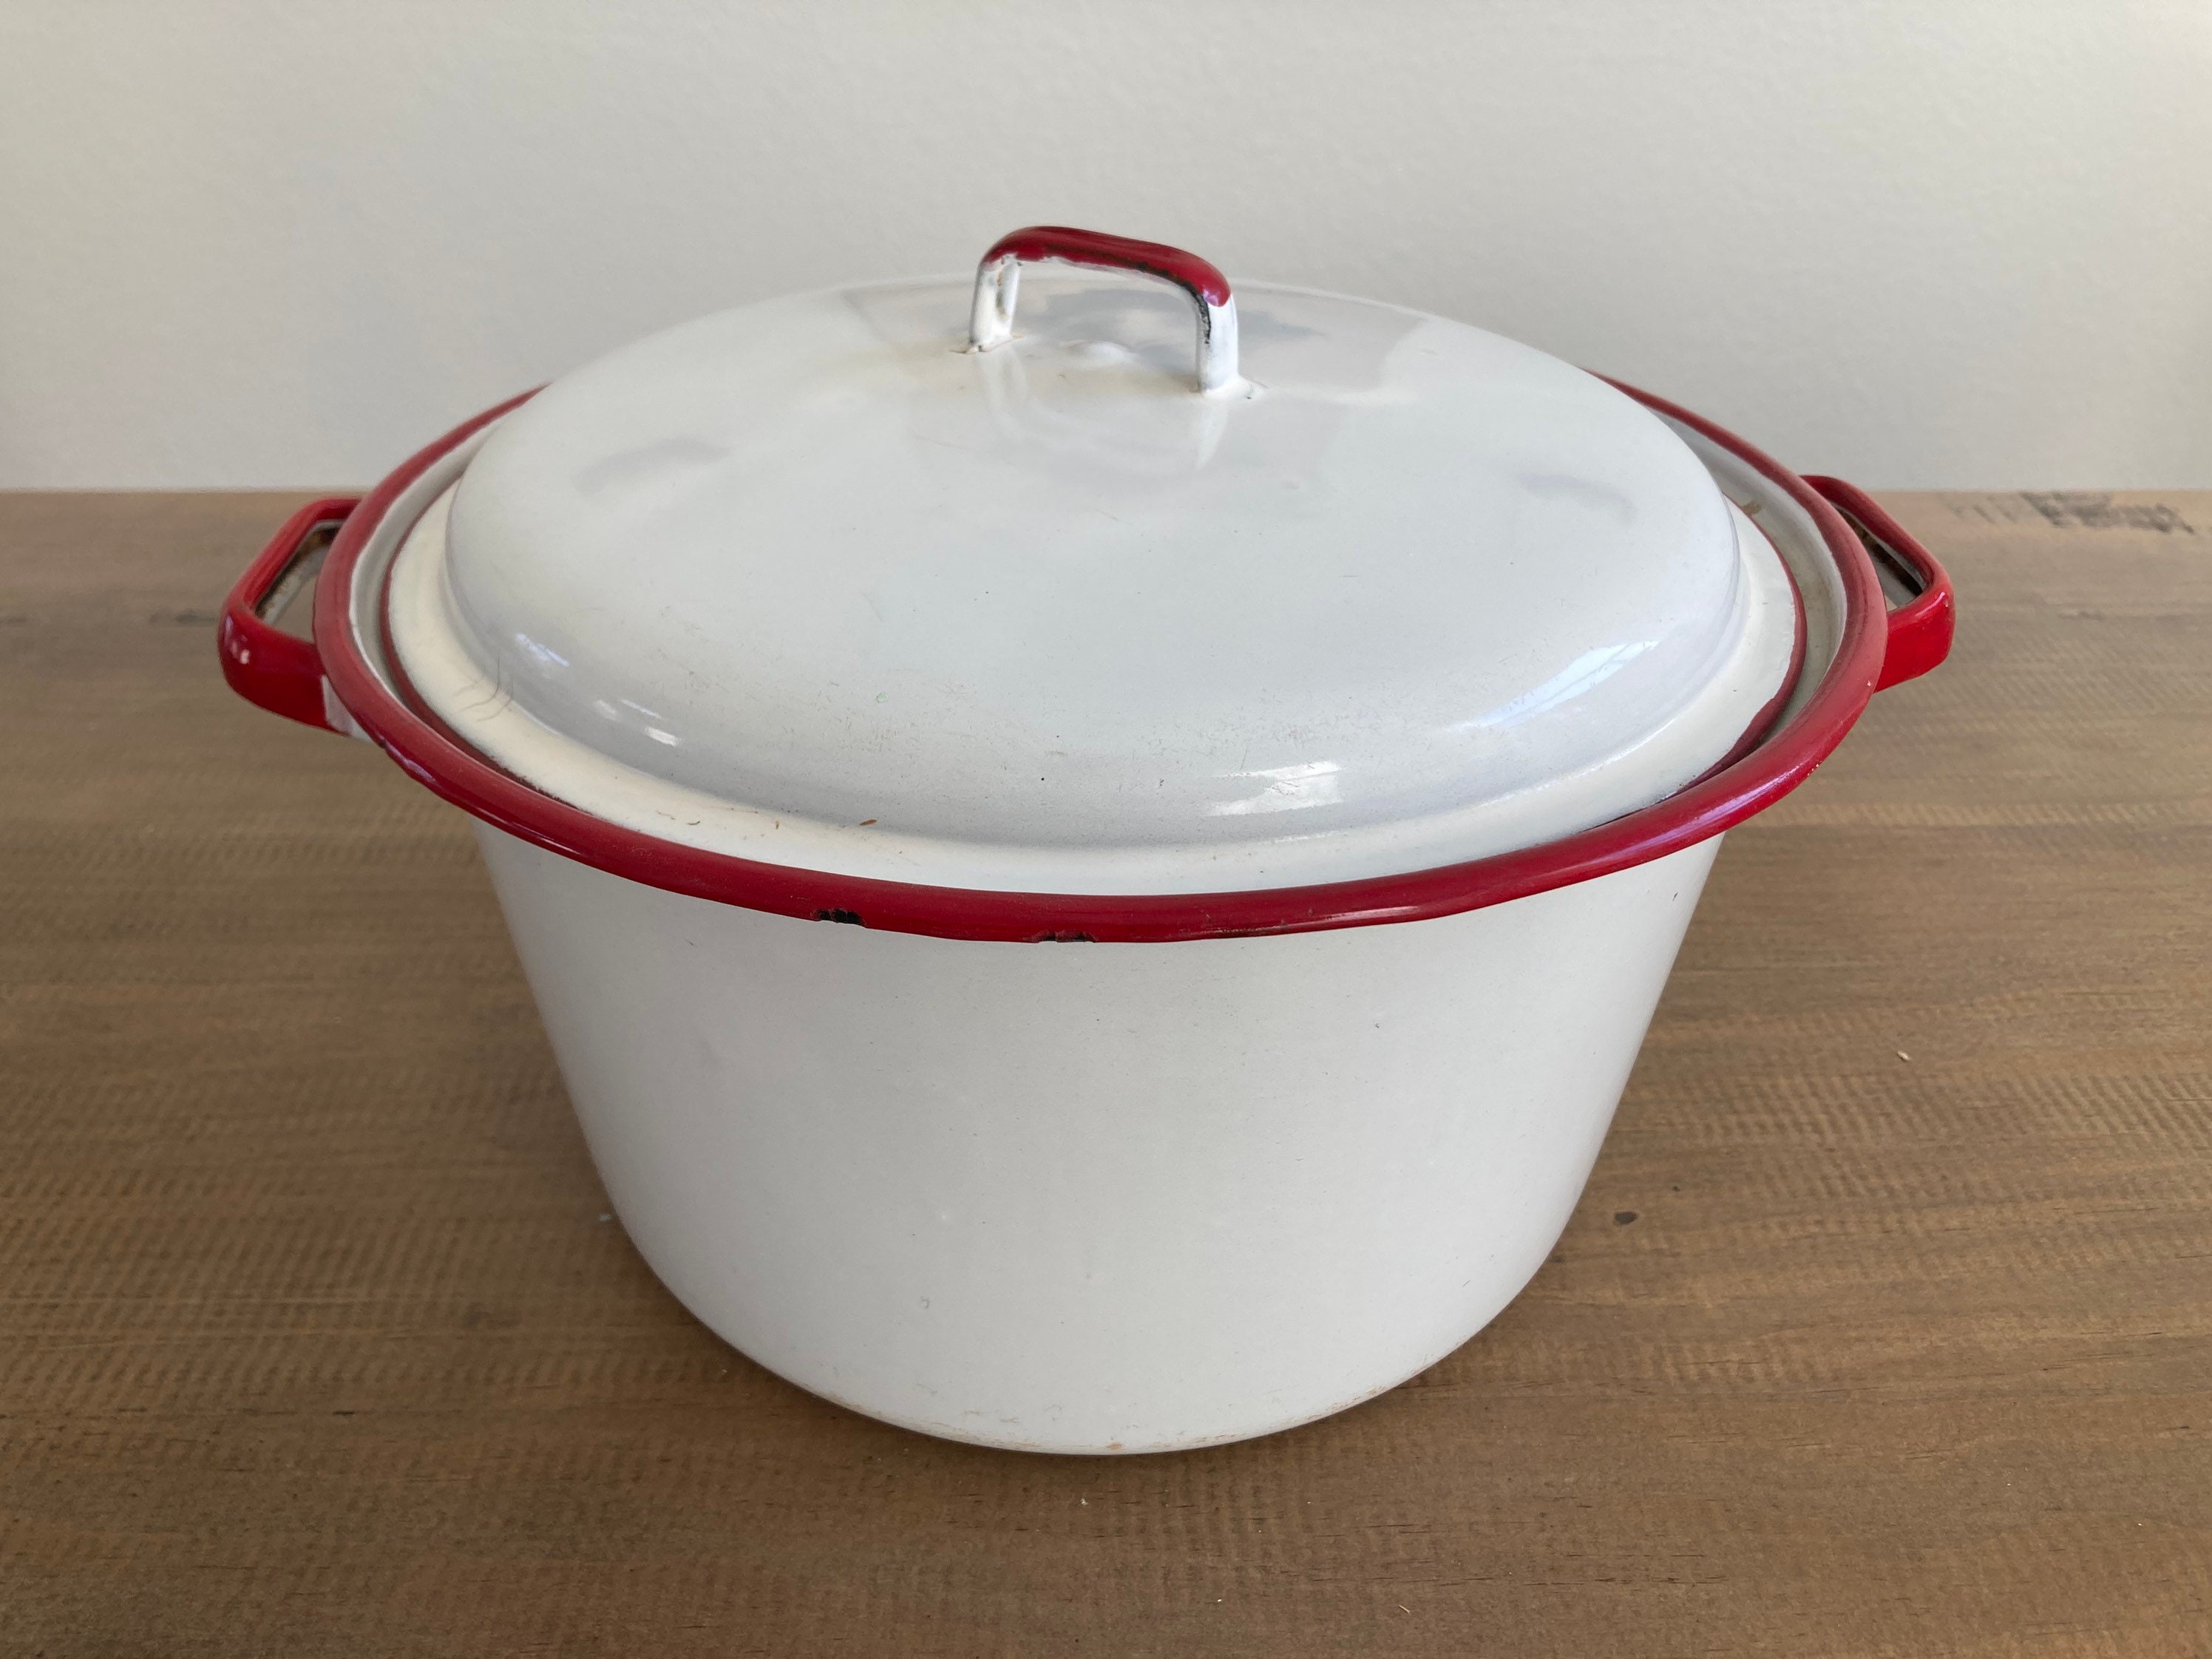 Biltmore 3.5 QT. Enameled Cast Iron Dutch Oven with Lid in Red 